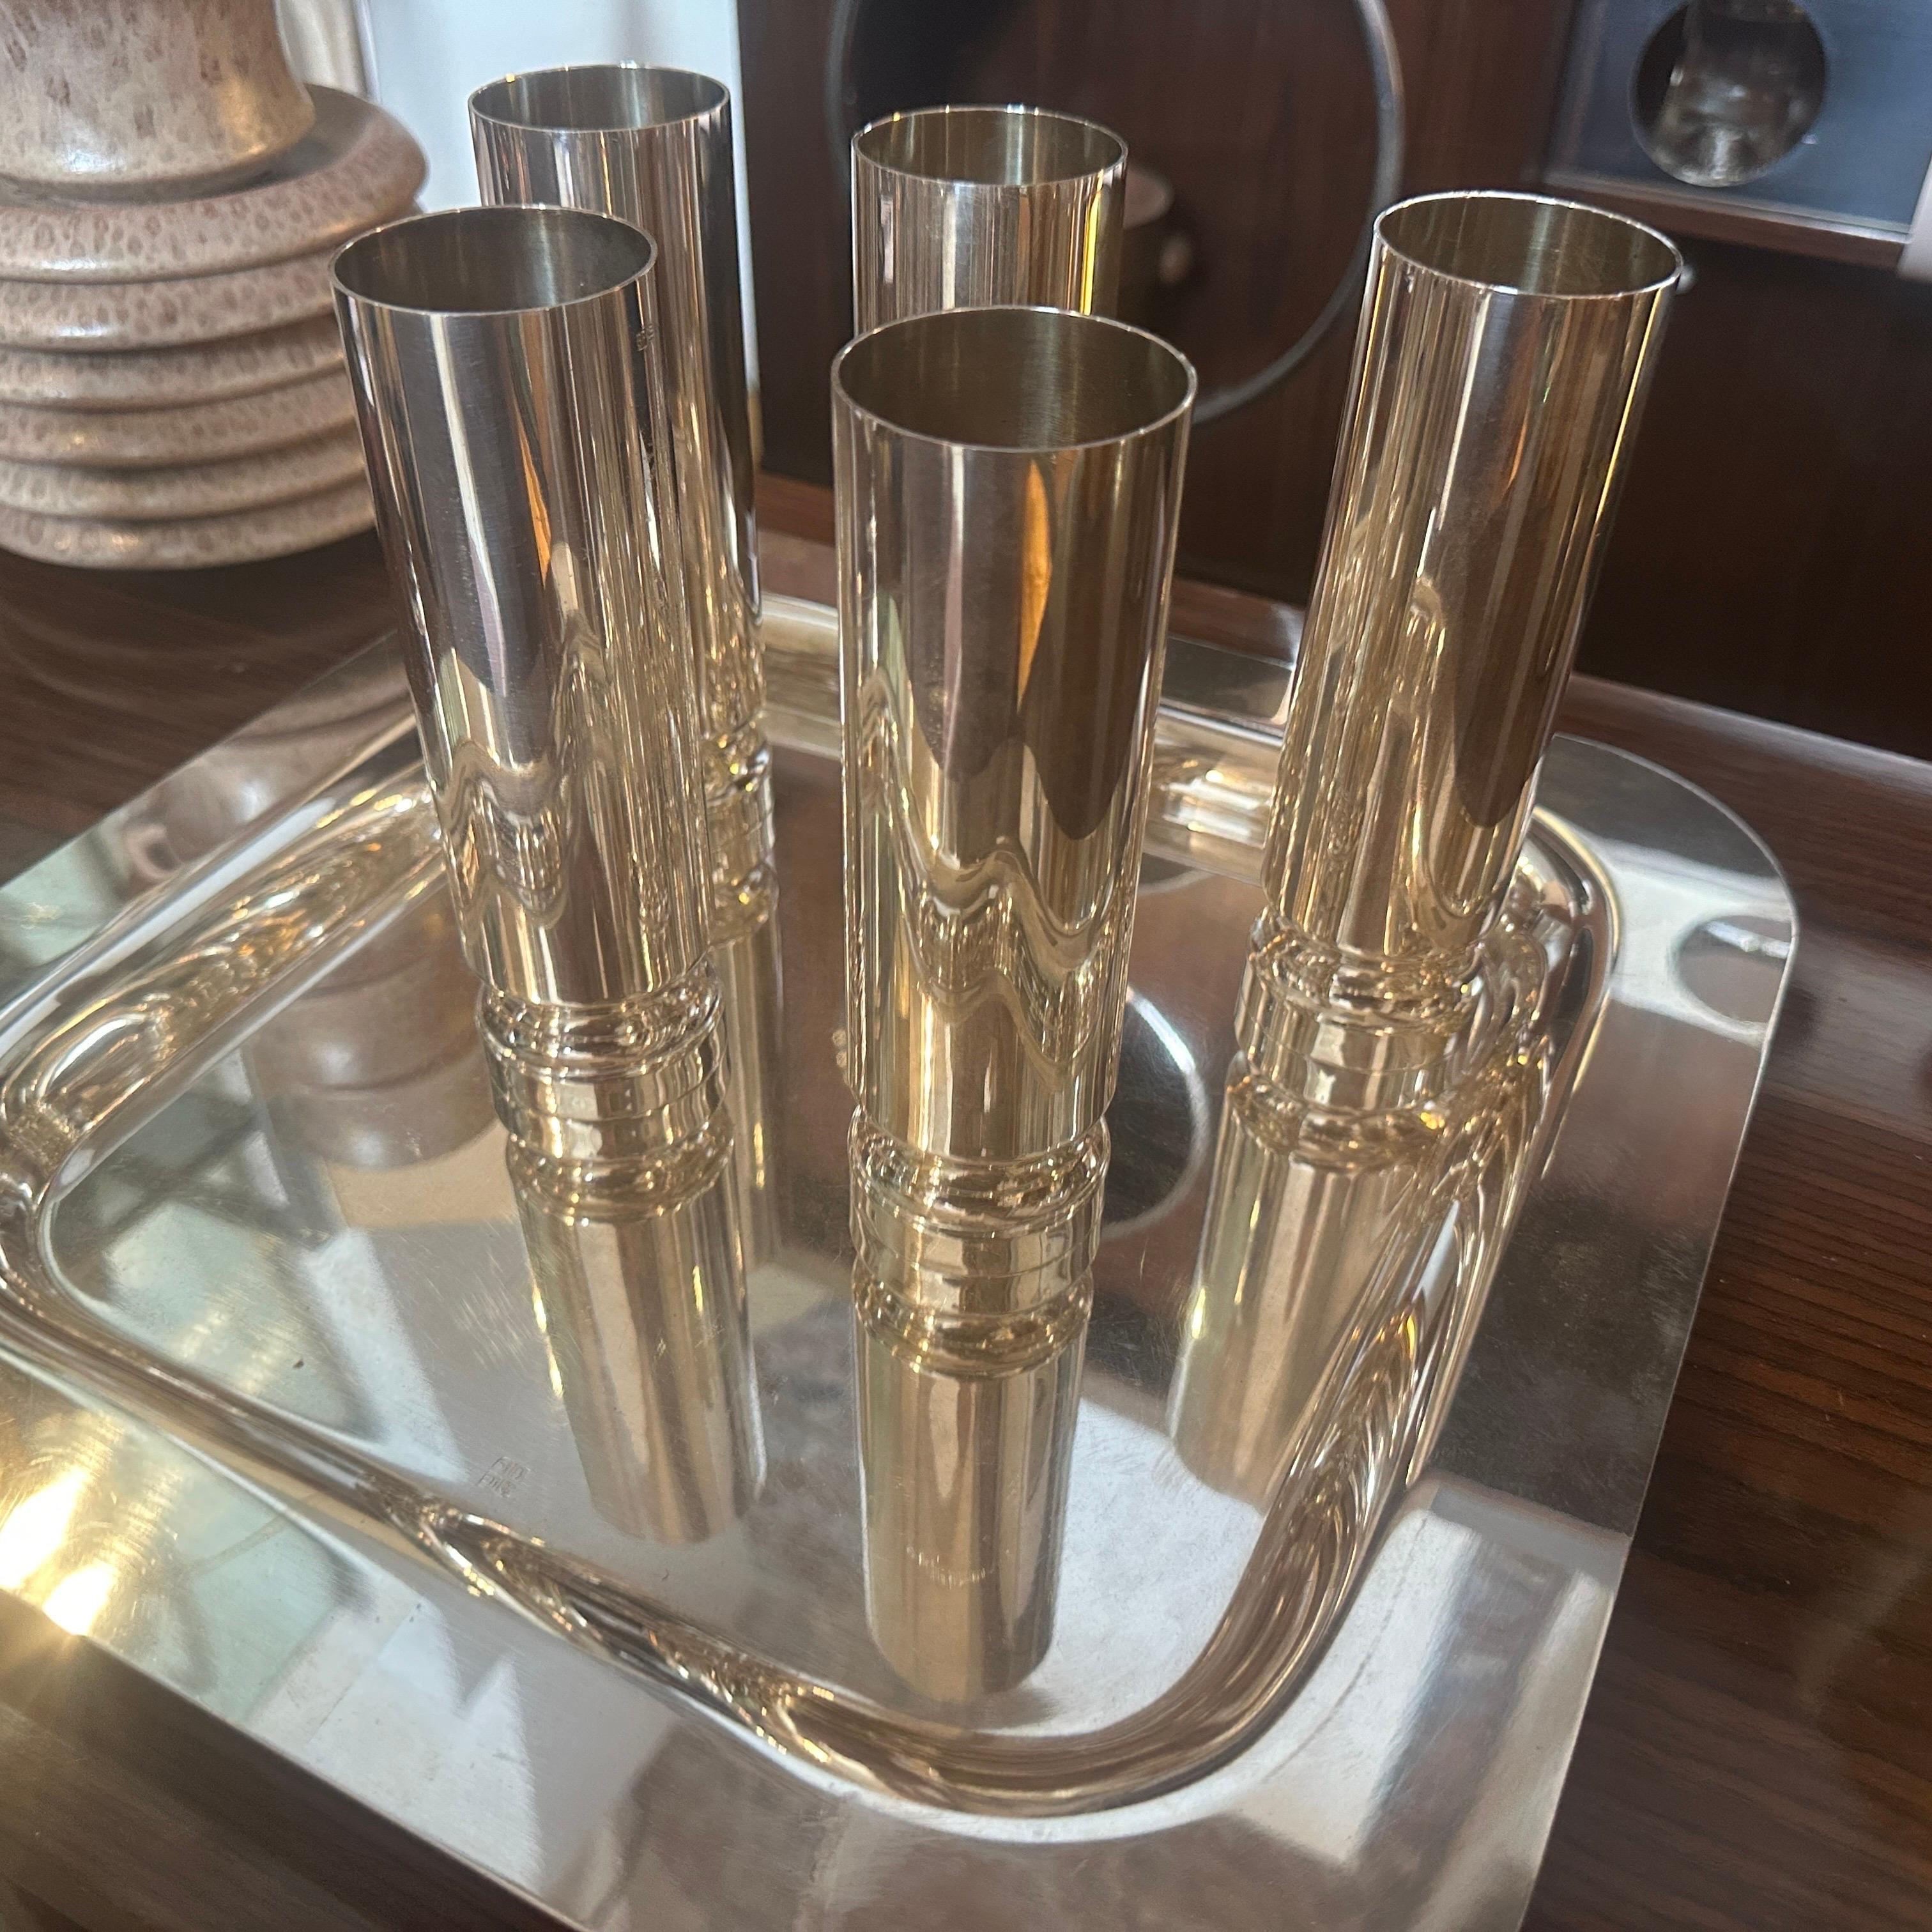 1980s Modernist Silver Plated Italian Square Tray and Champagne Flutes In Good Condition For Sale In Aci Castello, IT